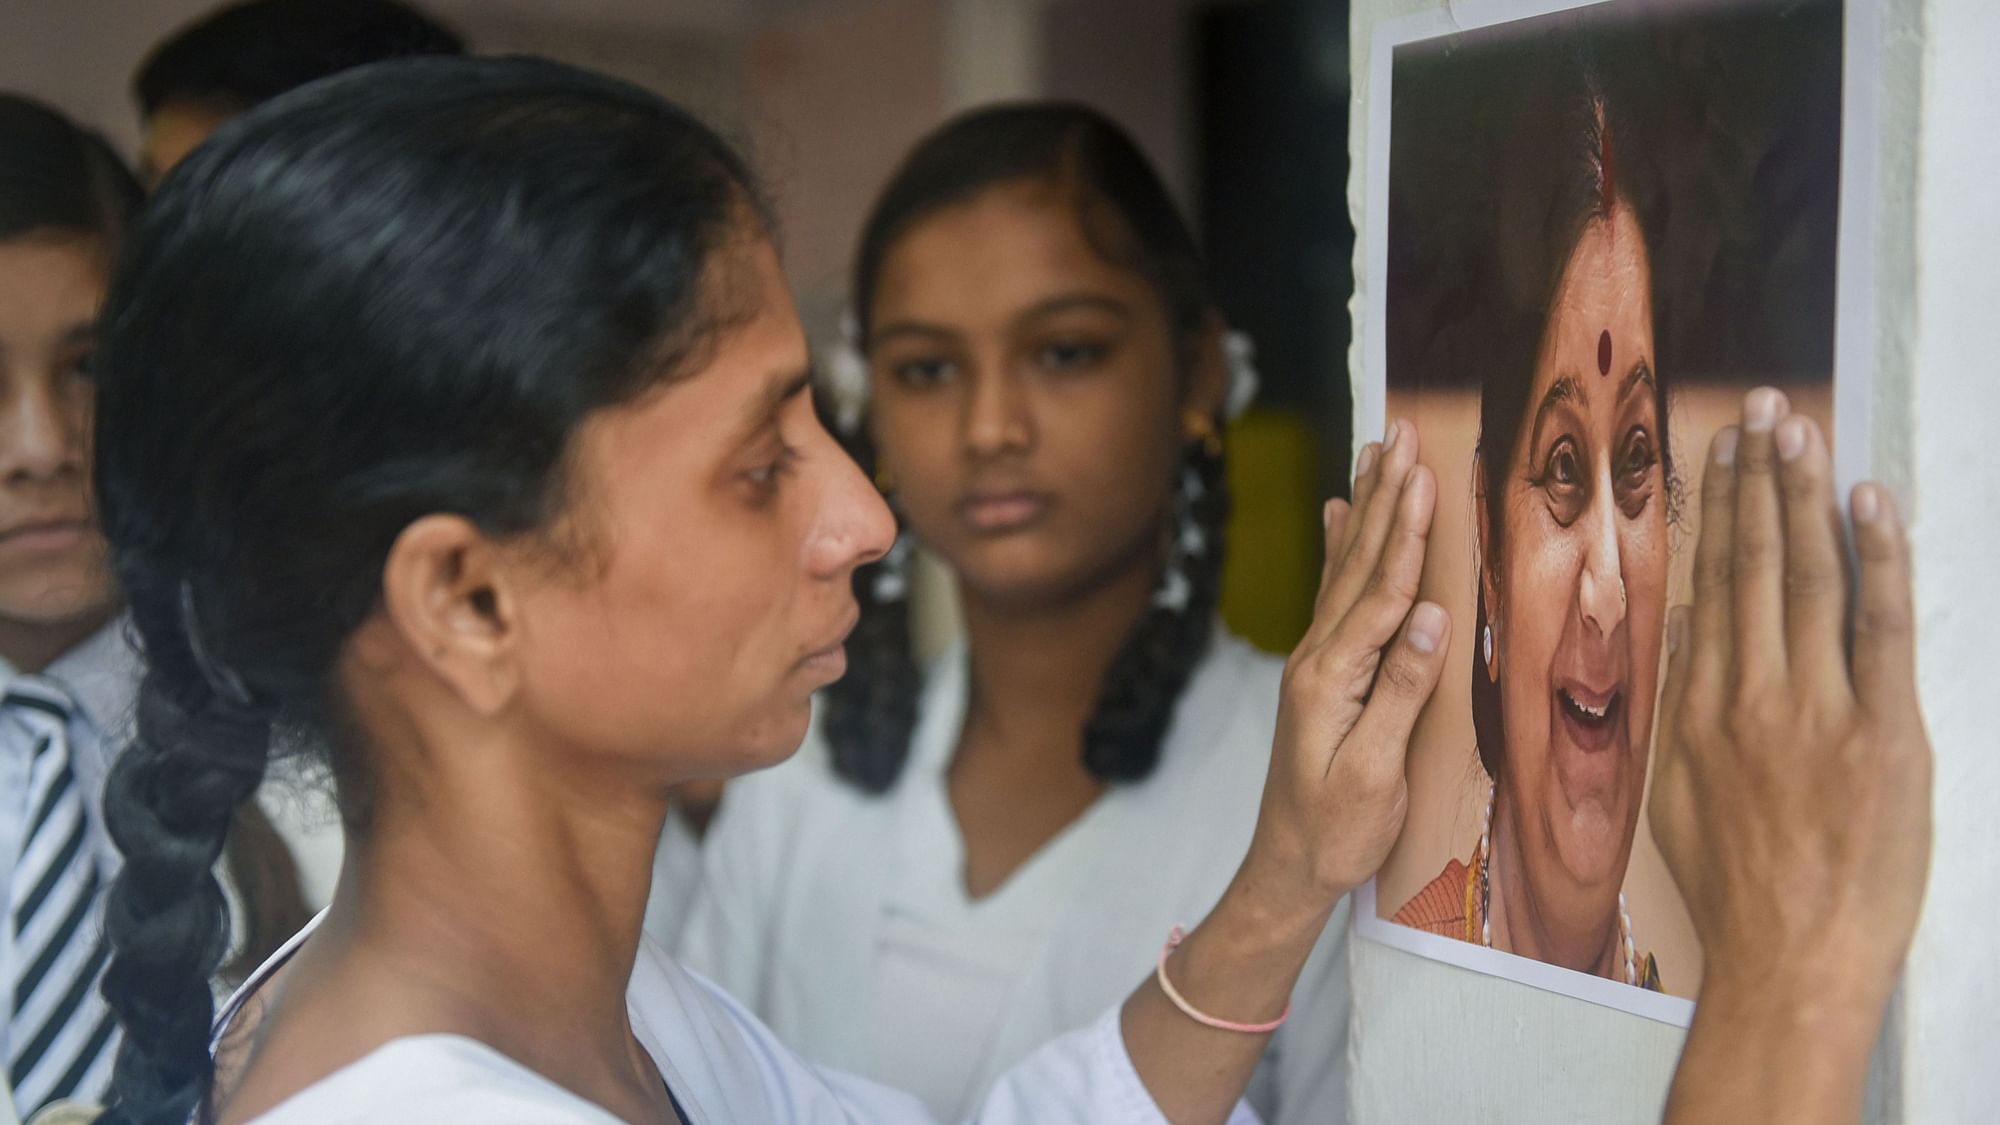 Geeta pays tribute to former BJP cabinet minister Sushma Swaraj during a condolence meeting in Indore on 7 August 2019.&nbsp;